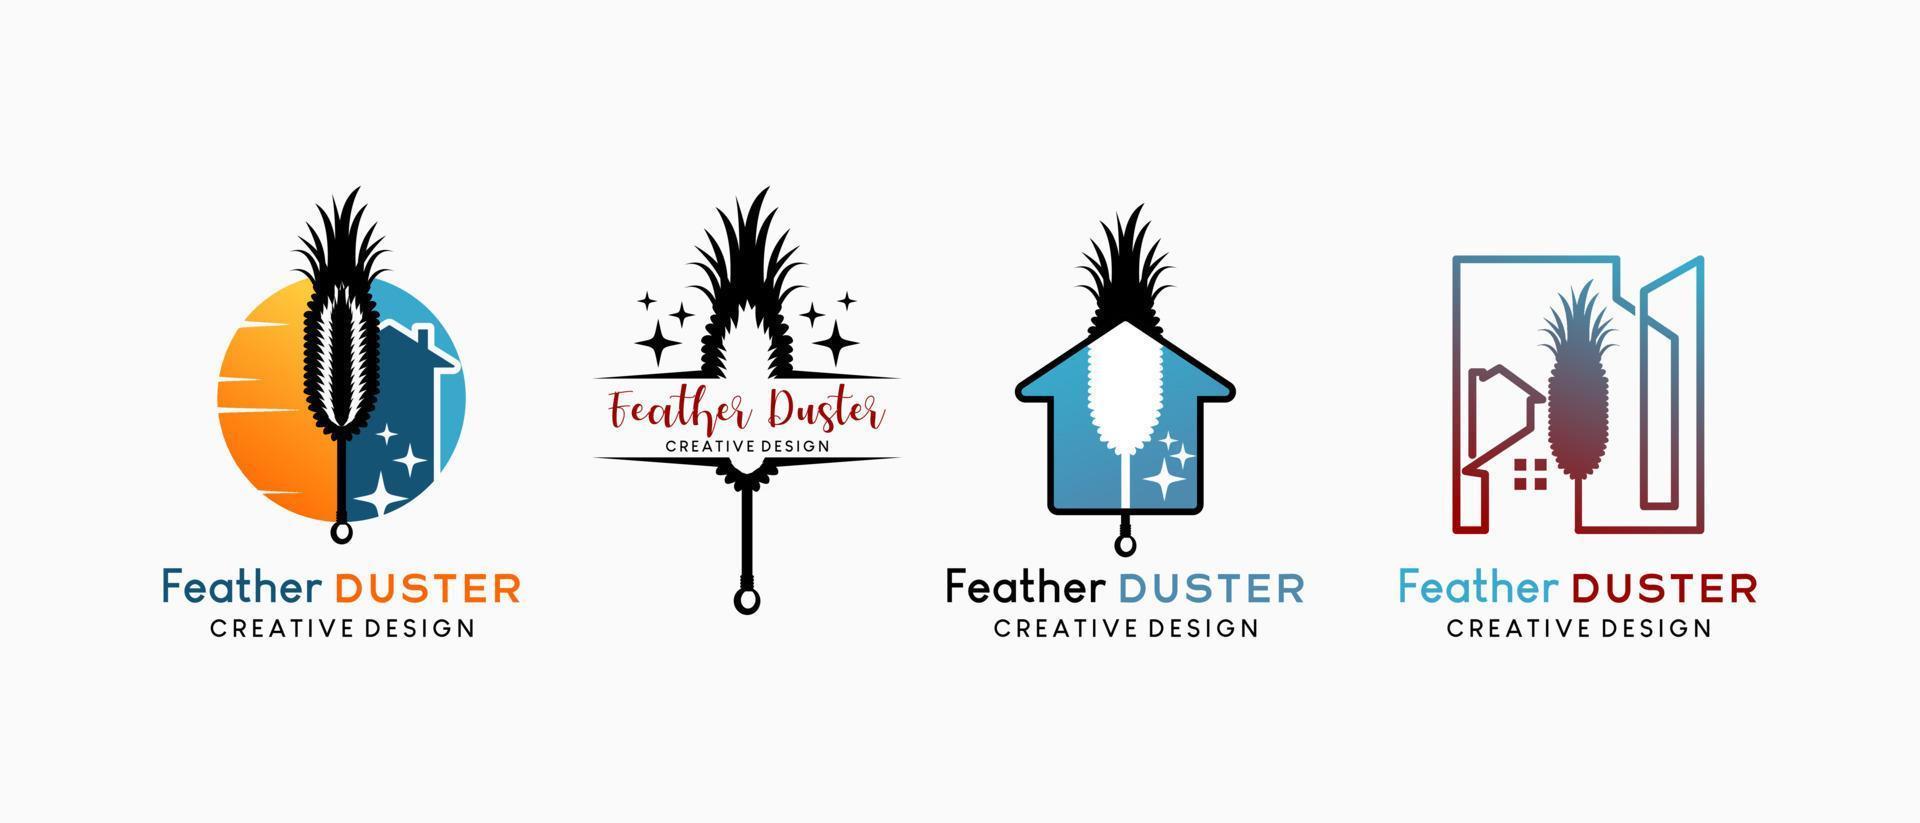 A collection of traditional feather duster logos with creative concepts, feather duster vector illustration quill